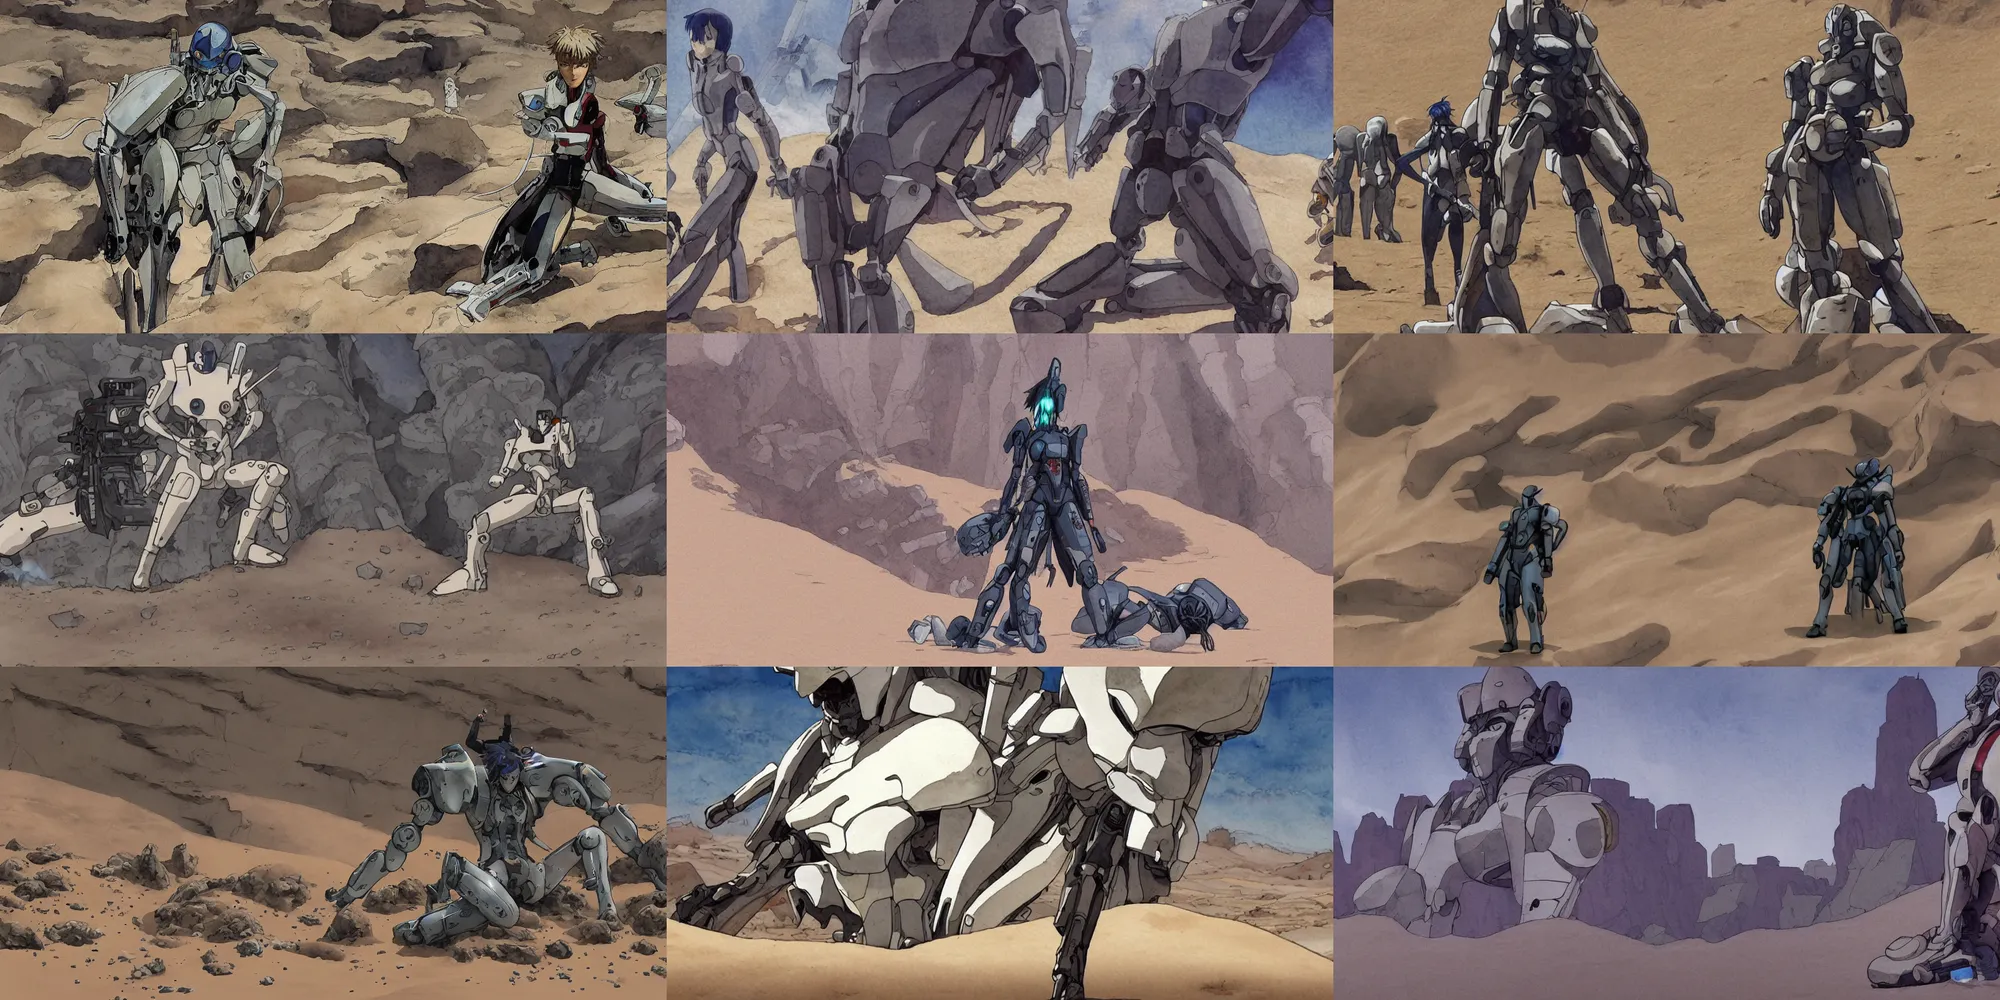 Prompt: incredible screenshot, simple watercolor, masamune shirow ghost in the shell movie scene close up broken Kusanagi, Giant robot head, giant robot bonesn spine and ribs in the desert sand dunes, in the desert, crazy looking rocks, deep chasm, rock climbing , nausicaa, cracks, brown mud, dust, take cover, bullet holes,, memorable scene, red, blue, orange, cool hair, odd pipes, metallic reflections, refraction, bounce light, phil hale, Yoji Shinkawa, bright rim light, hd, 4k, remaster, dynamic camera angle, deep 3 point perspective, fish eye, dynamic scene